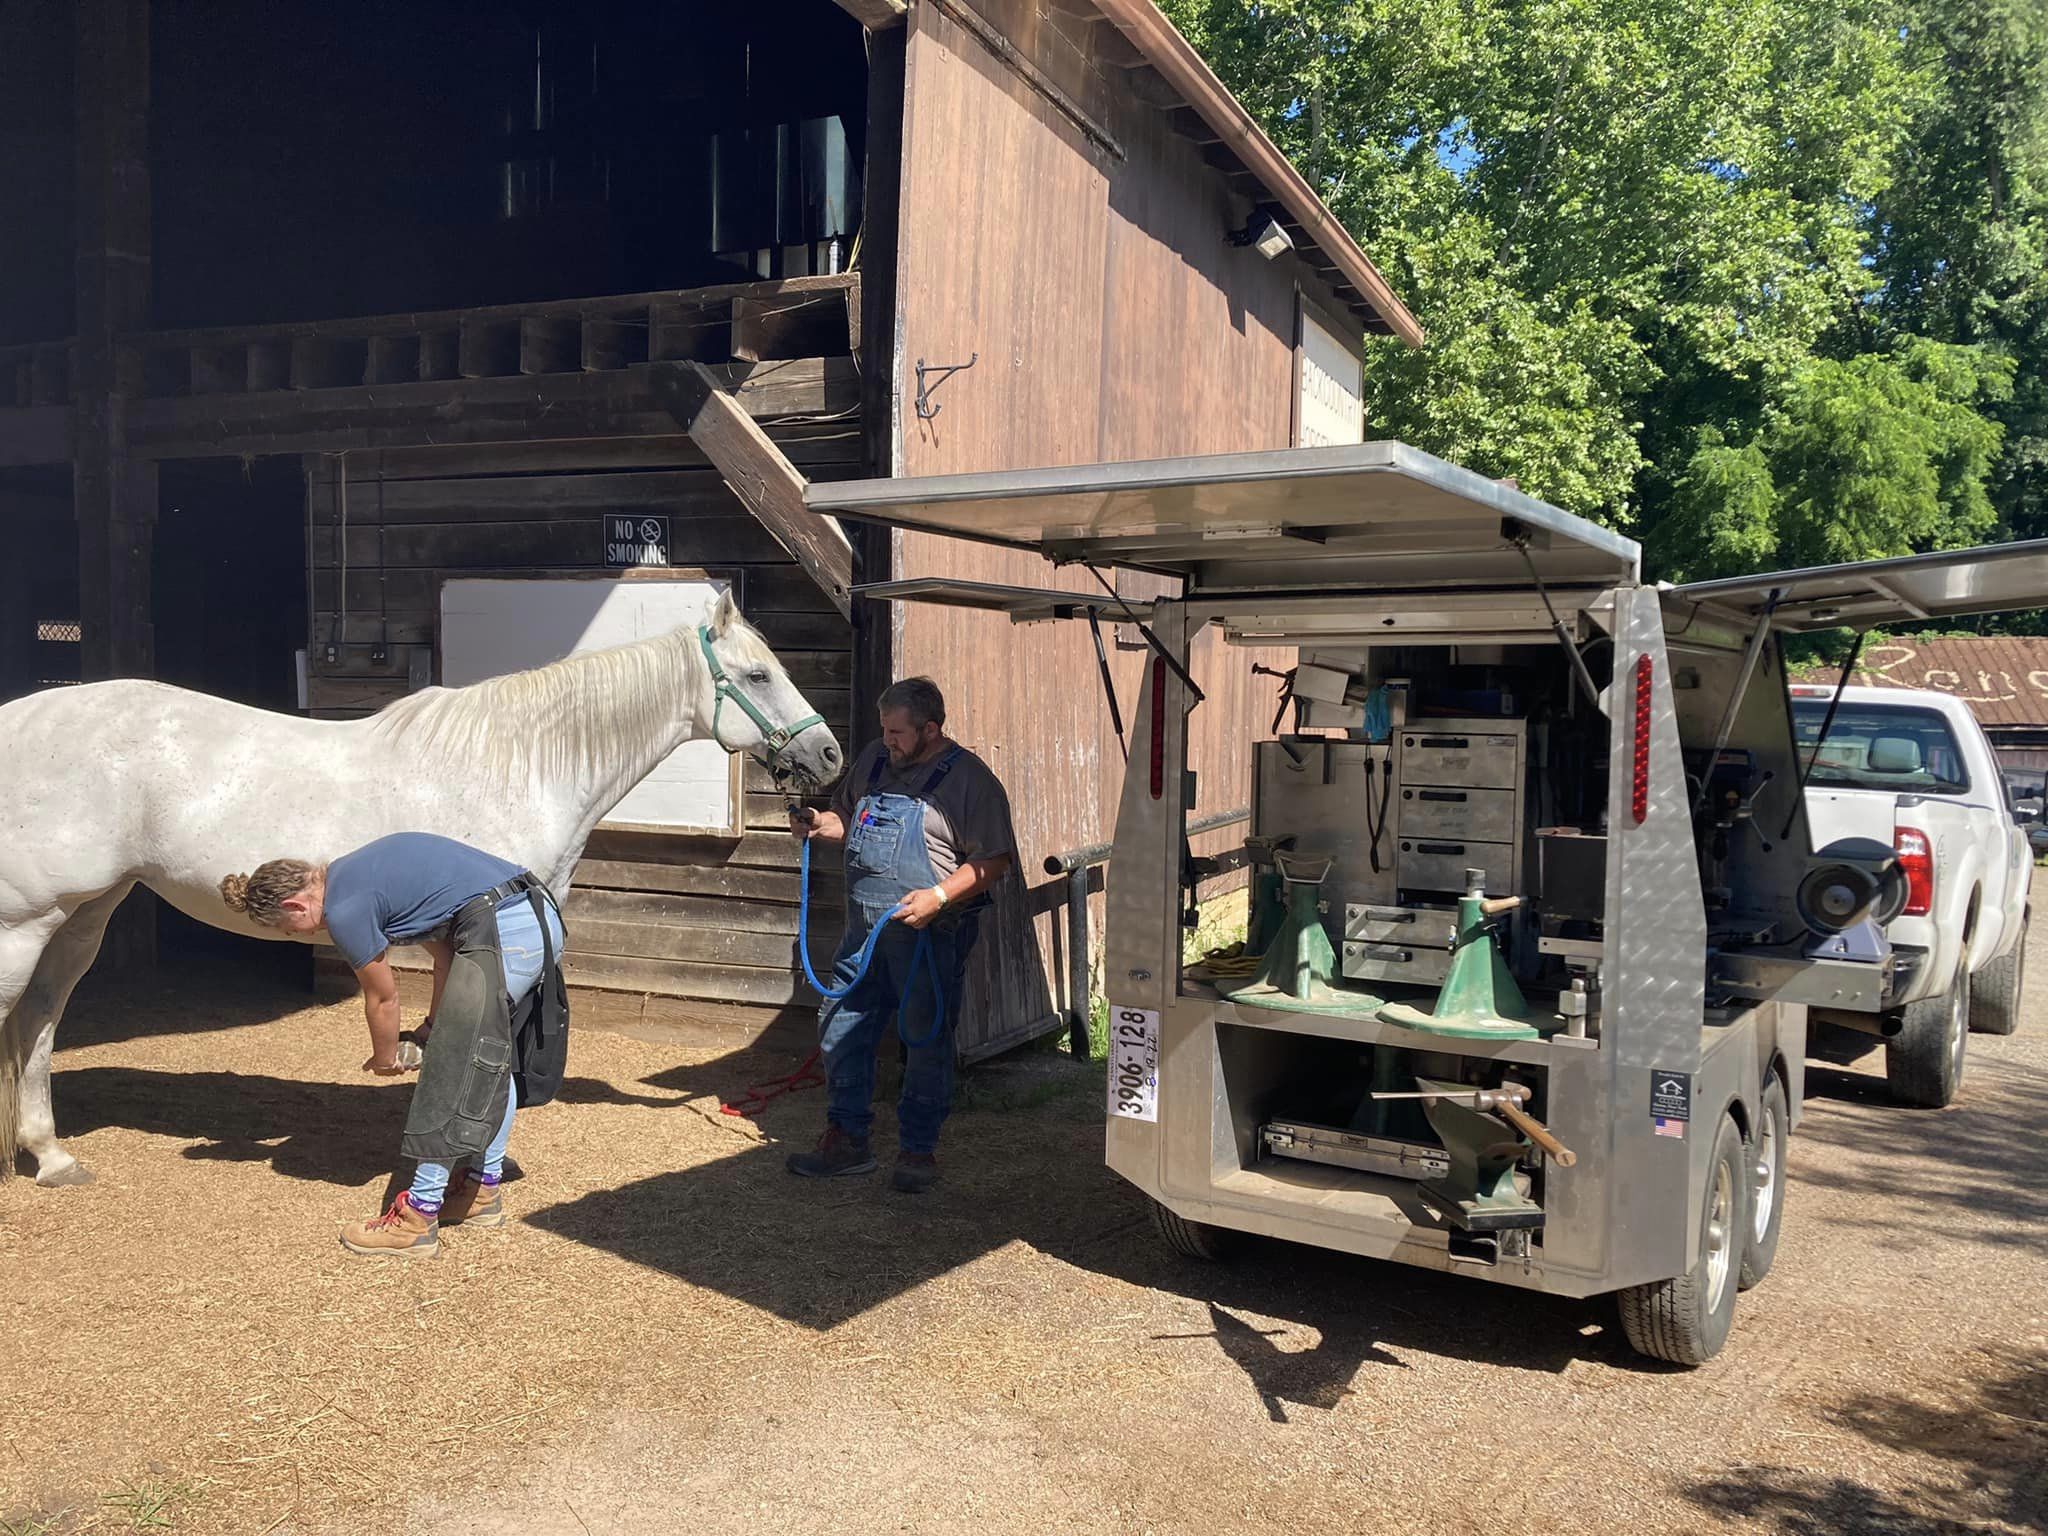 Farrier Trailor being used